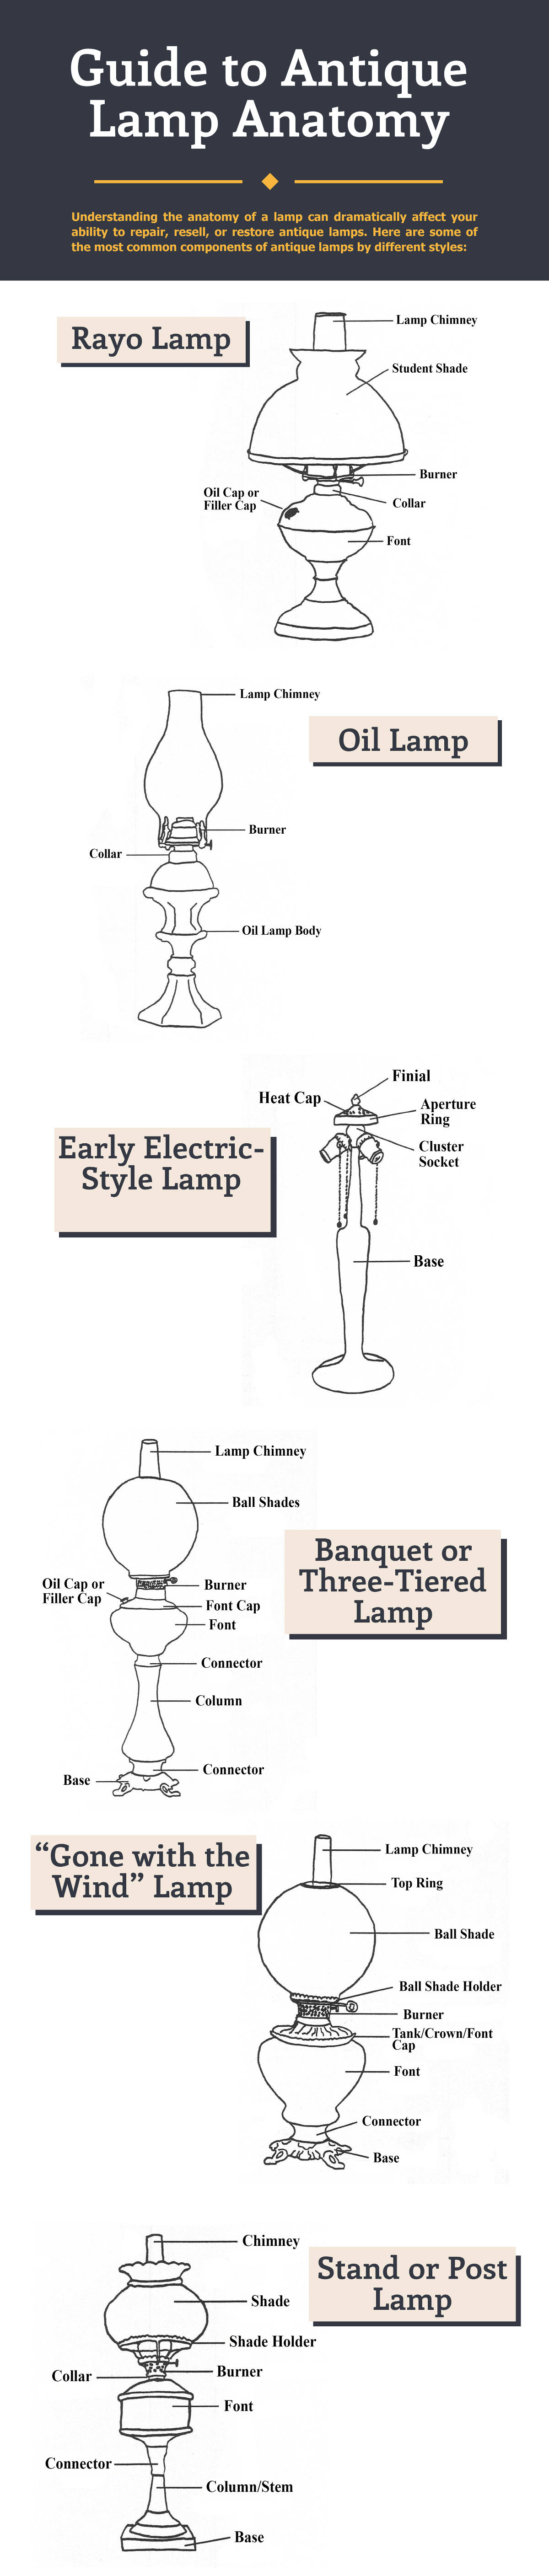 guide-to-antique-lamp-anatomy-optimized.jpg